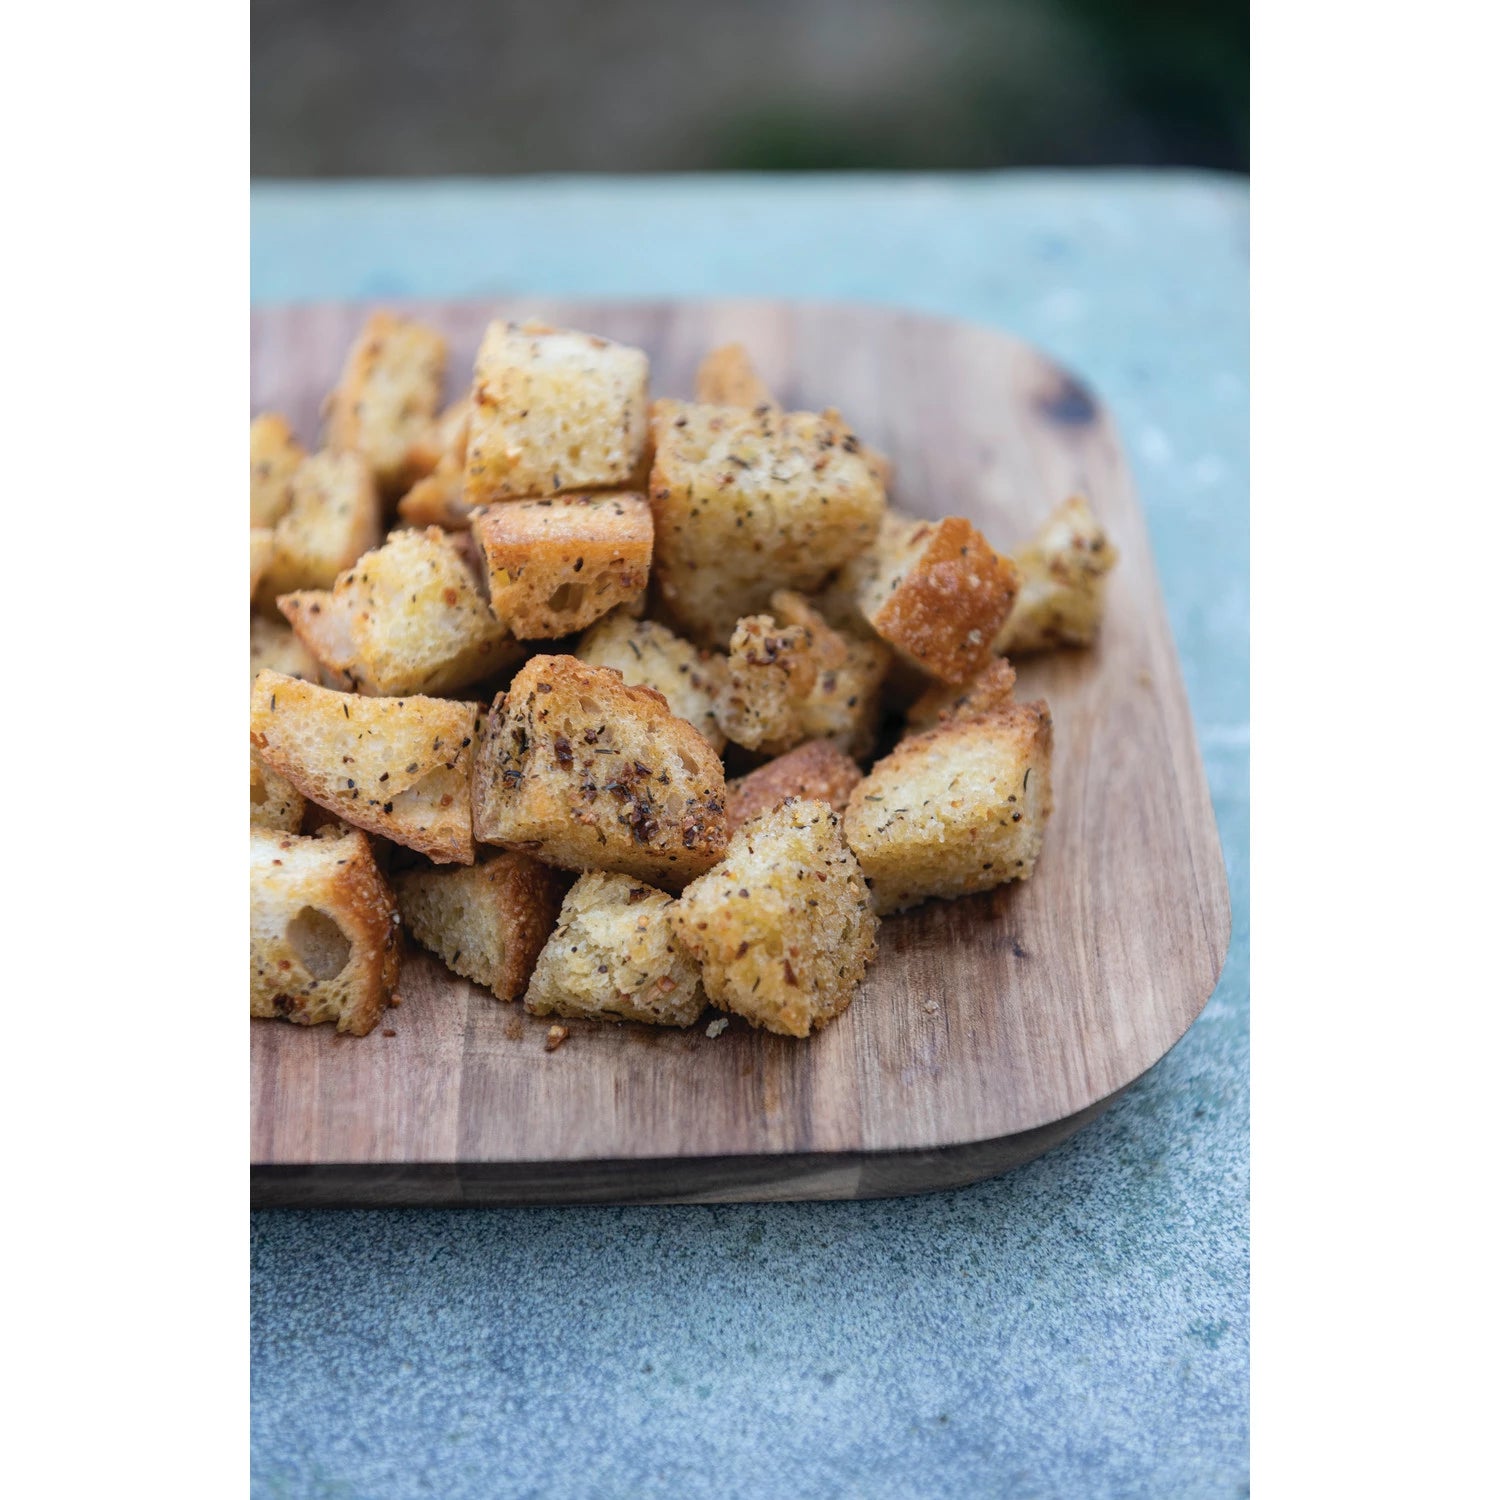 croutons seasoned in all purpose seasoning and displayed piled on a wooden board 